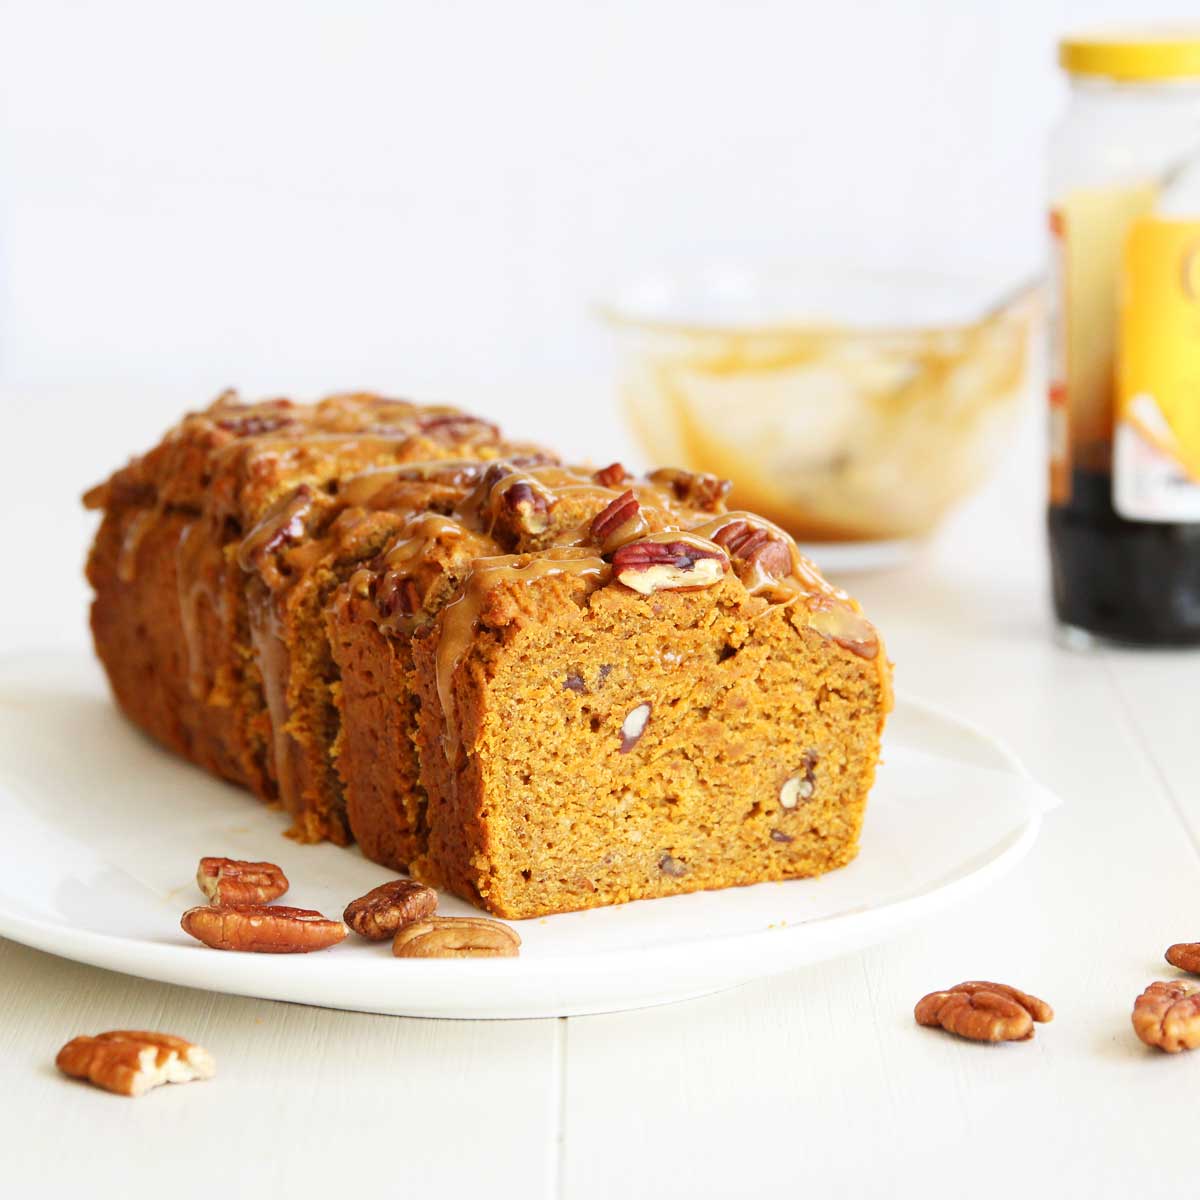 Molasses Pumpkin Bread With Pecan Nuts (No Eggs Or Dairy Required!) - Peanut Butter Banana Bread